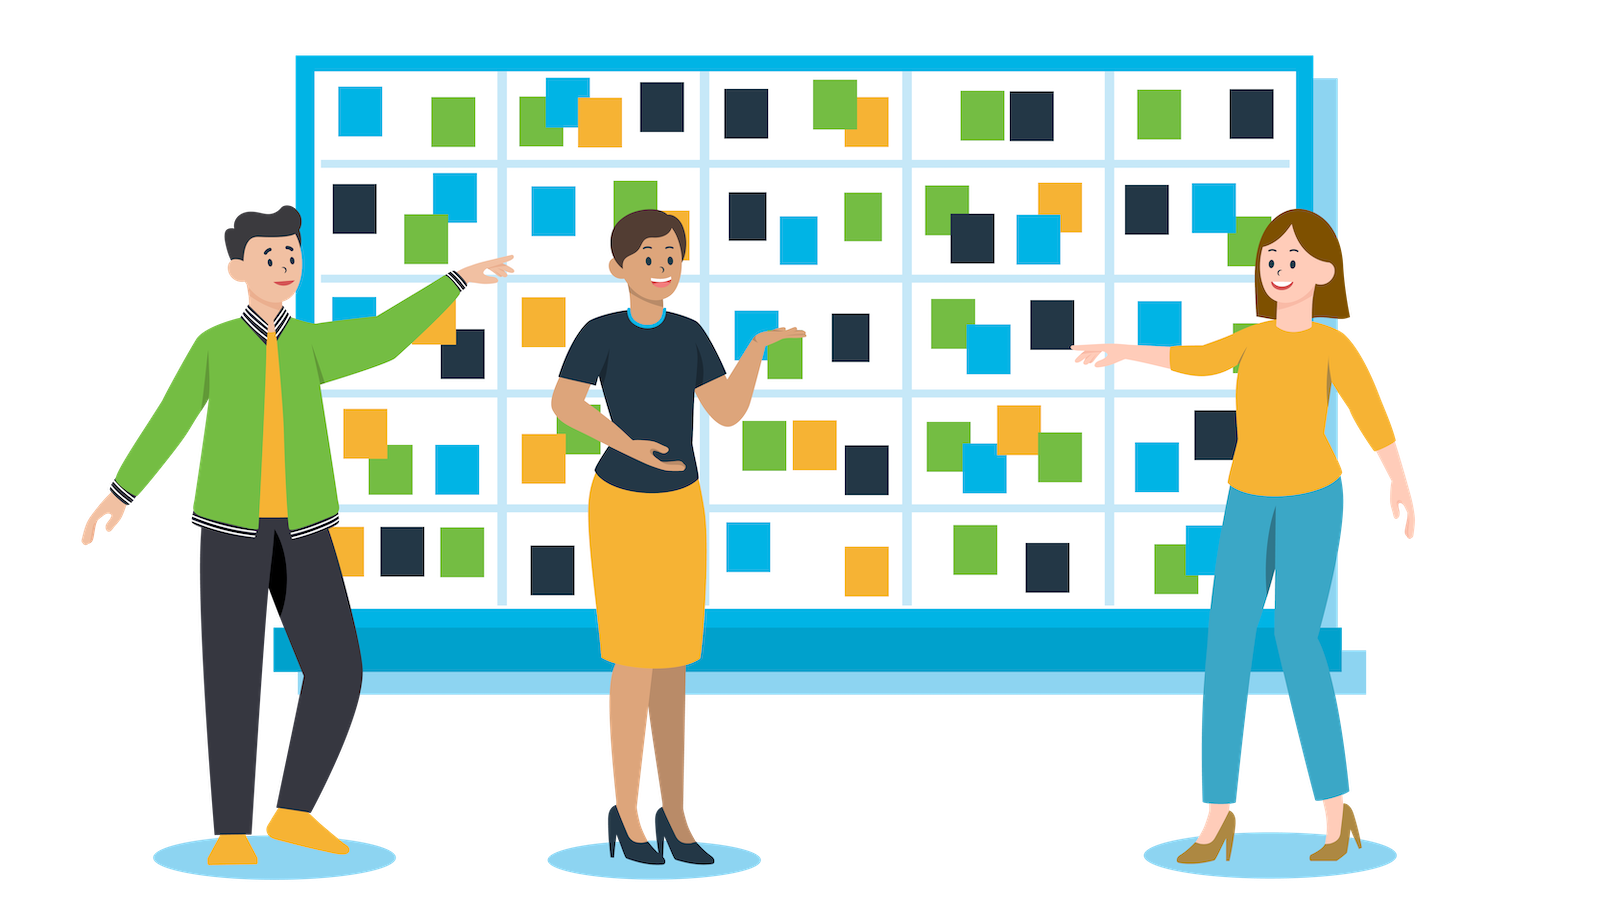 Illustration of 3 people standing in front of a large board with sticky notes and pointing to different areas. 